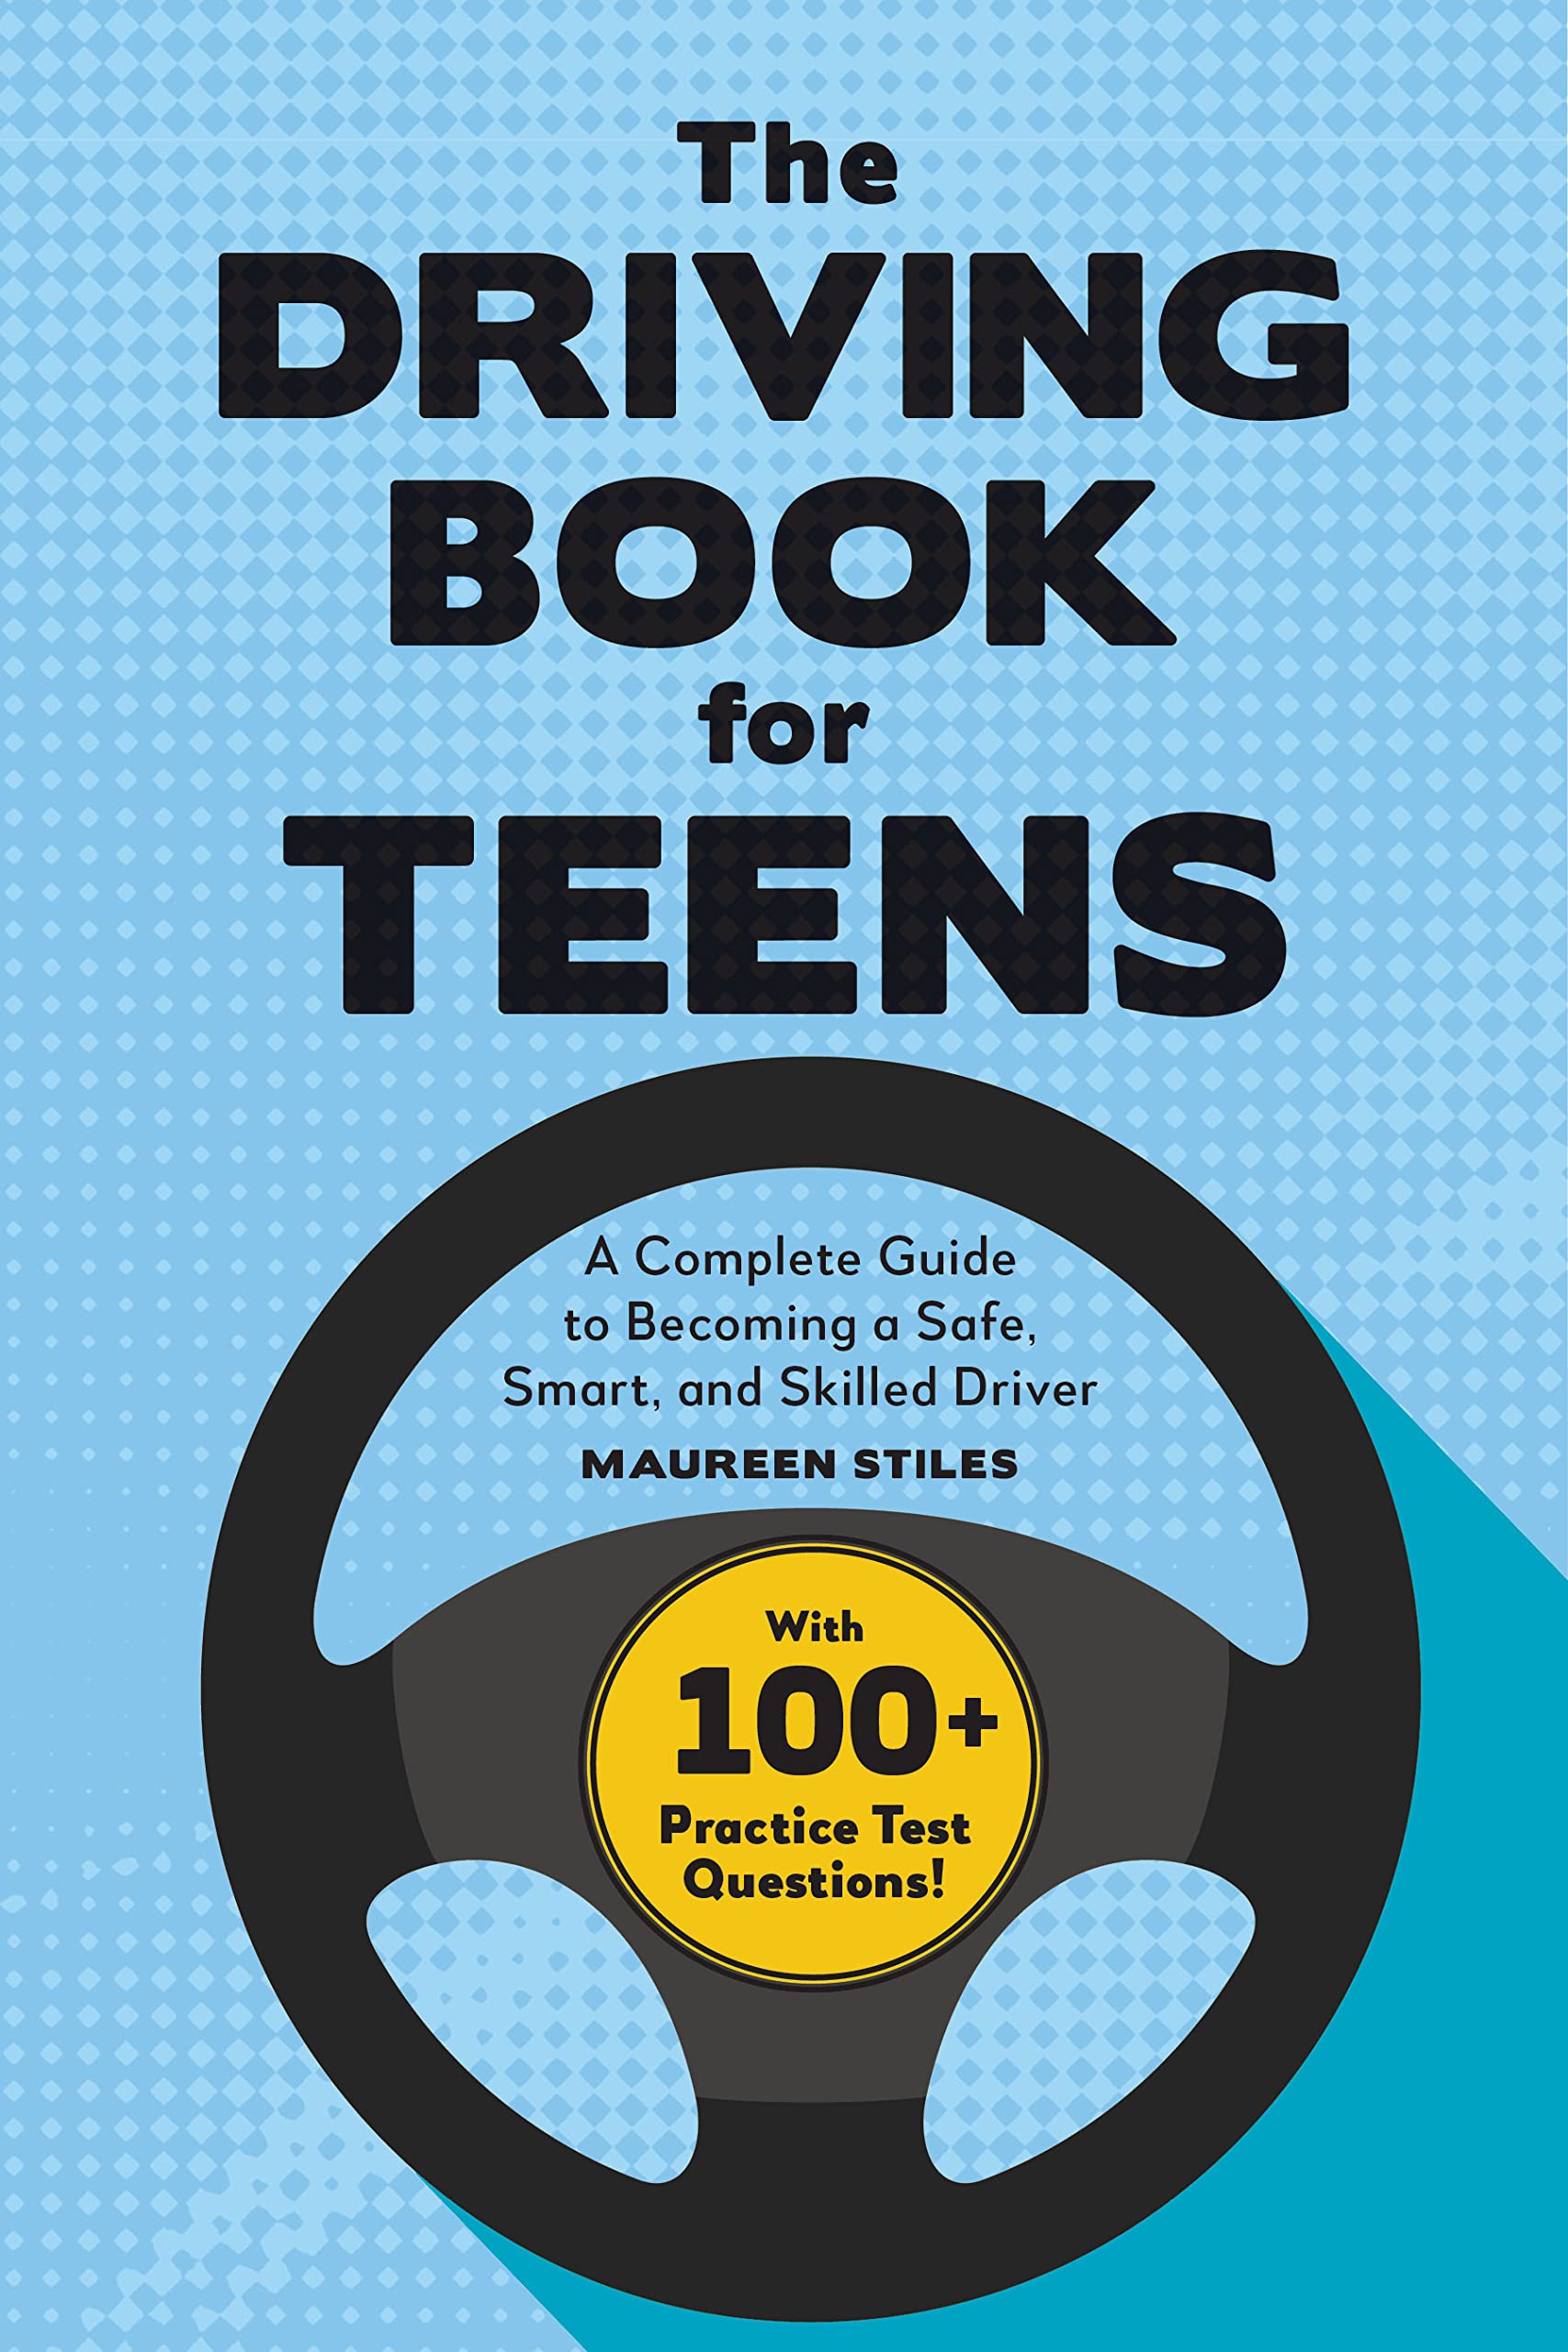 Cover image for "The Driving Book for Teens"